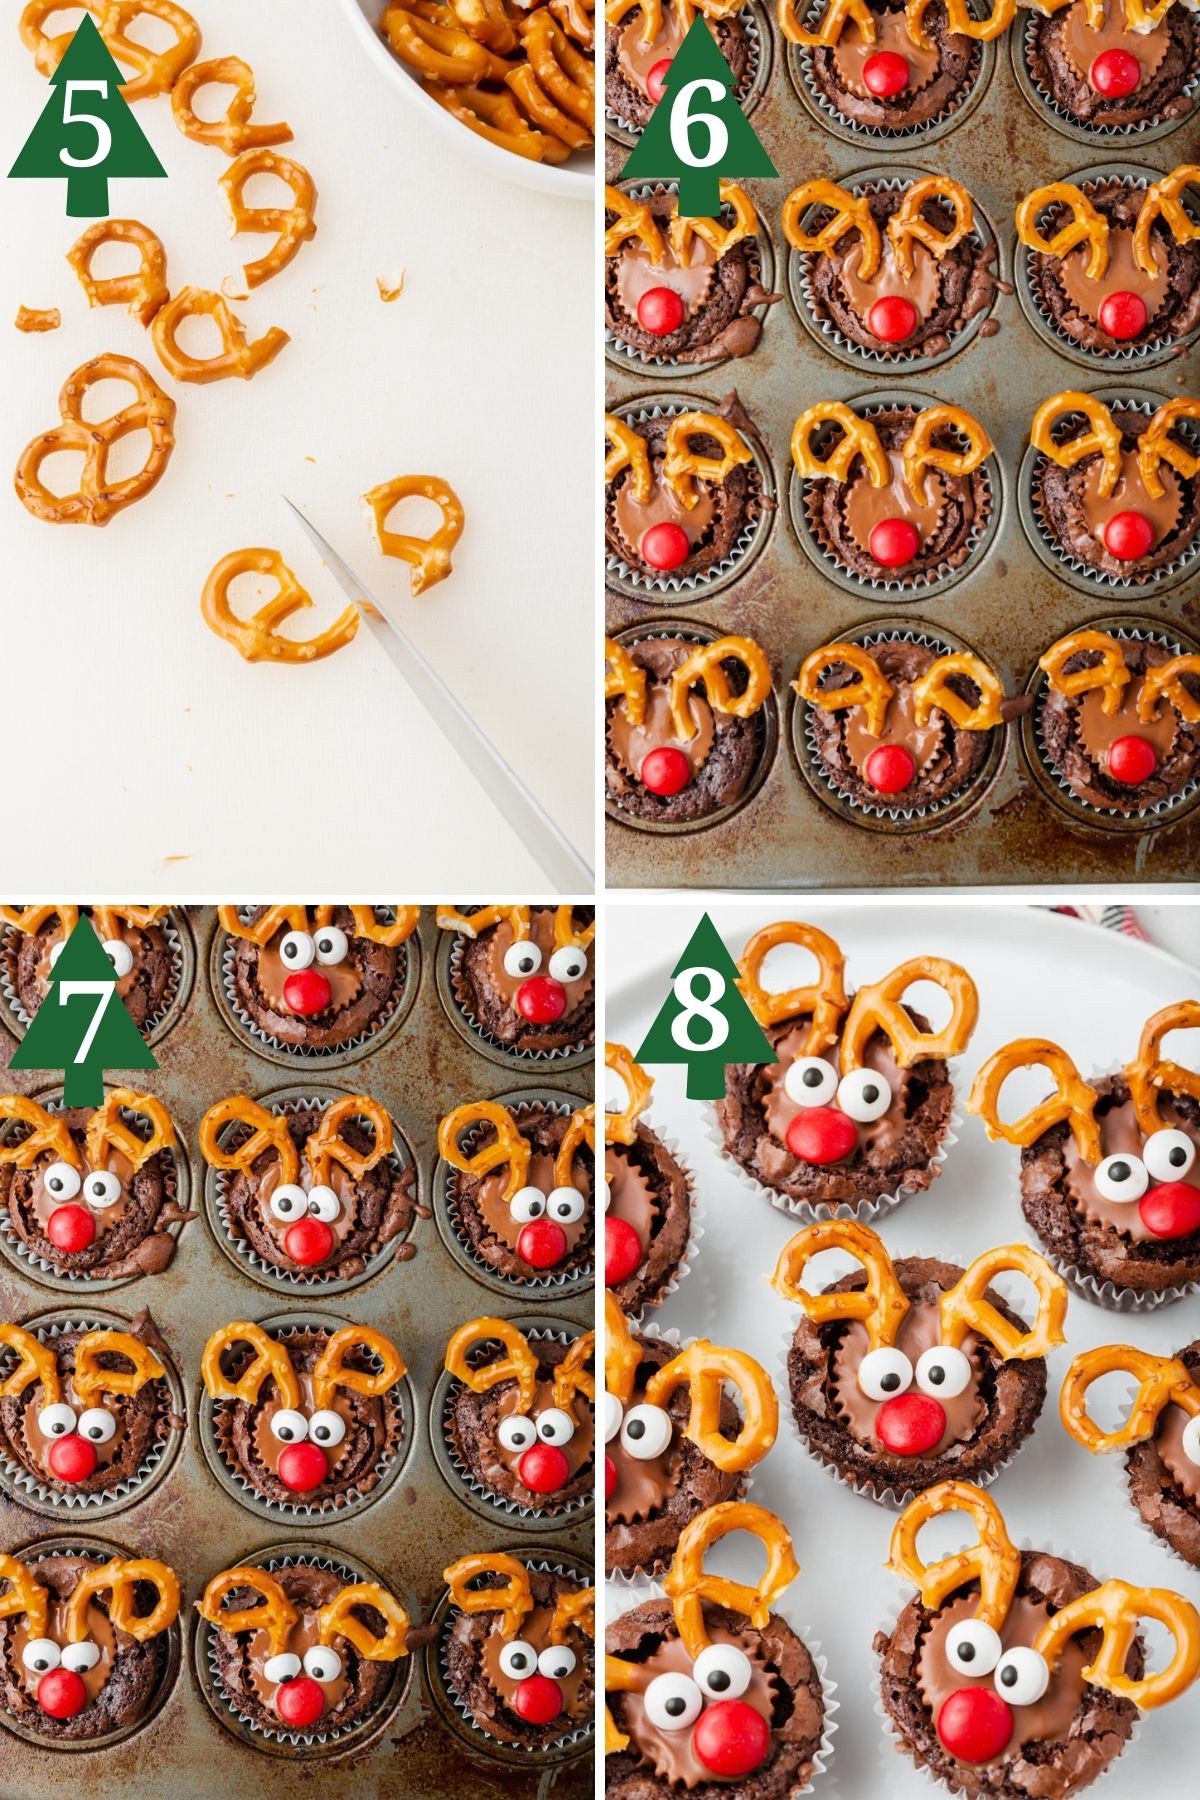 Steps 5-8 for making Reindeer Peanut Butter Brownie Cups.